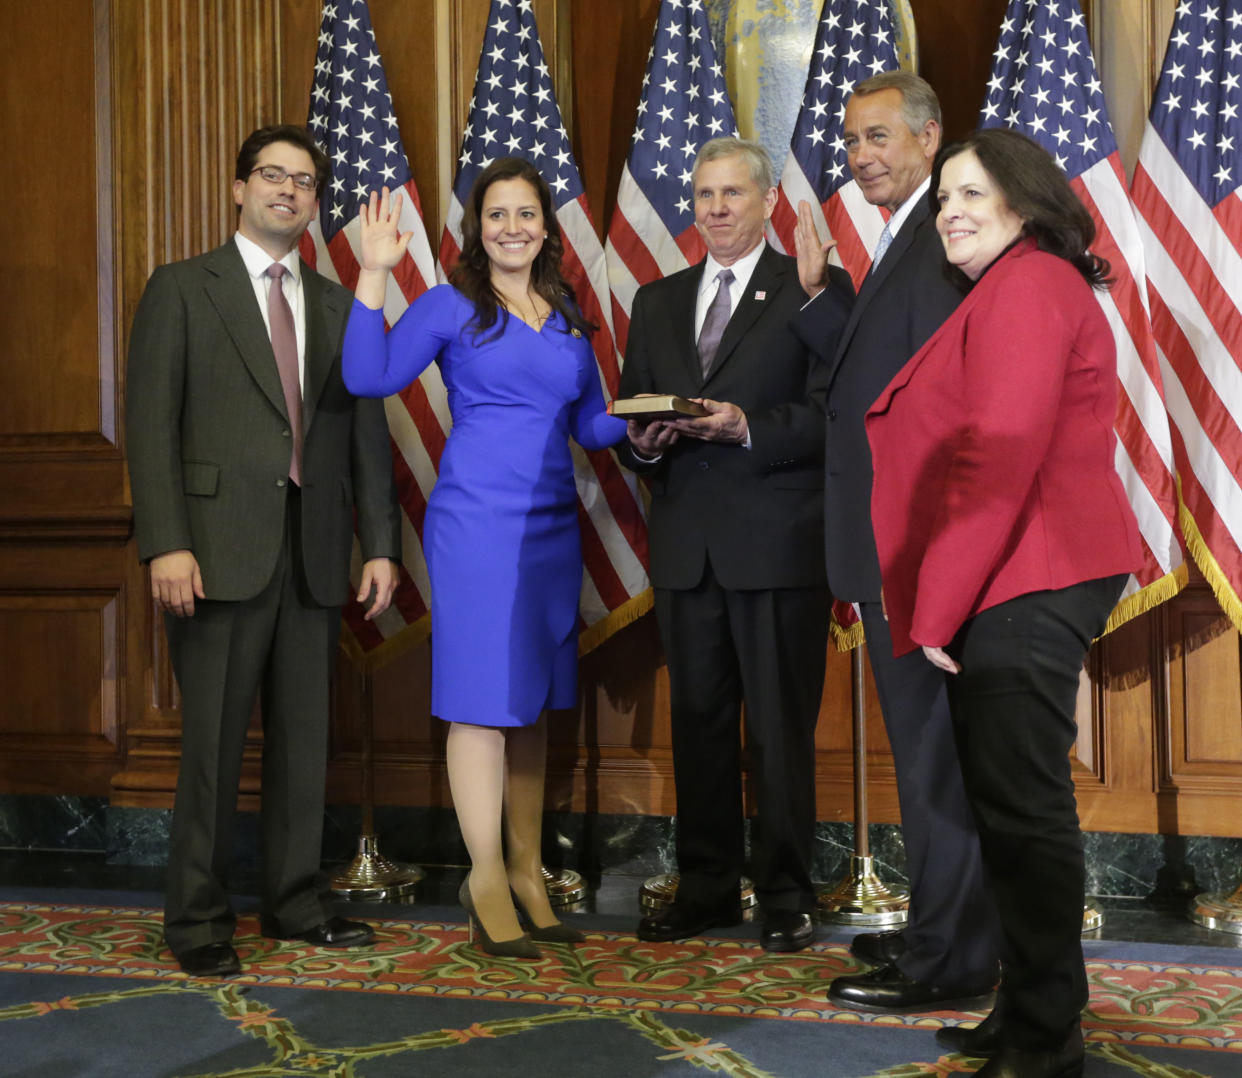 House Speaker John Boehner of Ohio administers the House oath to Rep. Elise Stefanik, R-NY., during a ceremonial re-enactment swearing-in ceremony, Tuesday, Jan. 6, 2015, in the Rayburn Room on Capitol Hill in Washington. From left are, Stefanik's brother Matt, and their parents Ken and Melaine Stefanik. (Photo: Pablo Martinez Monsivais/AP)  